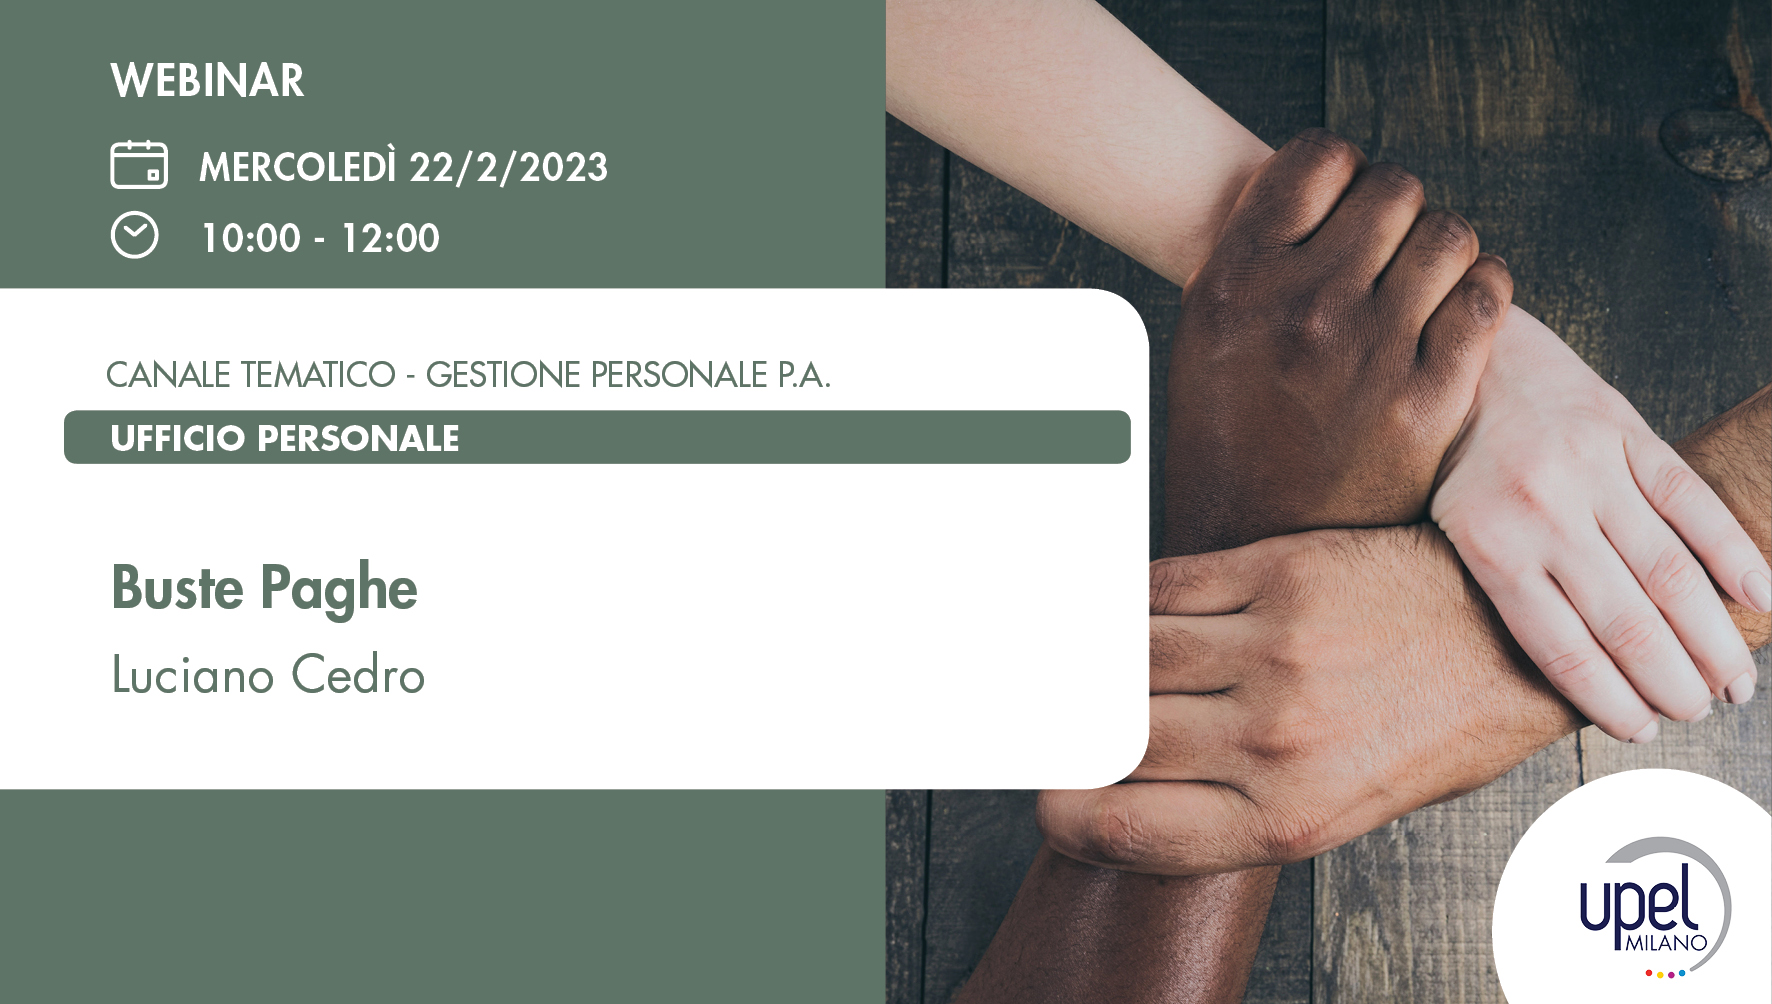 Canale Tematico Gestione Personale  P.A. - Buste Paghe